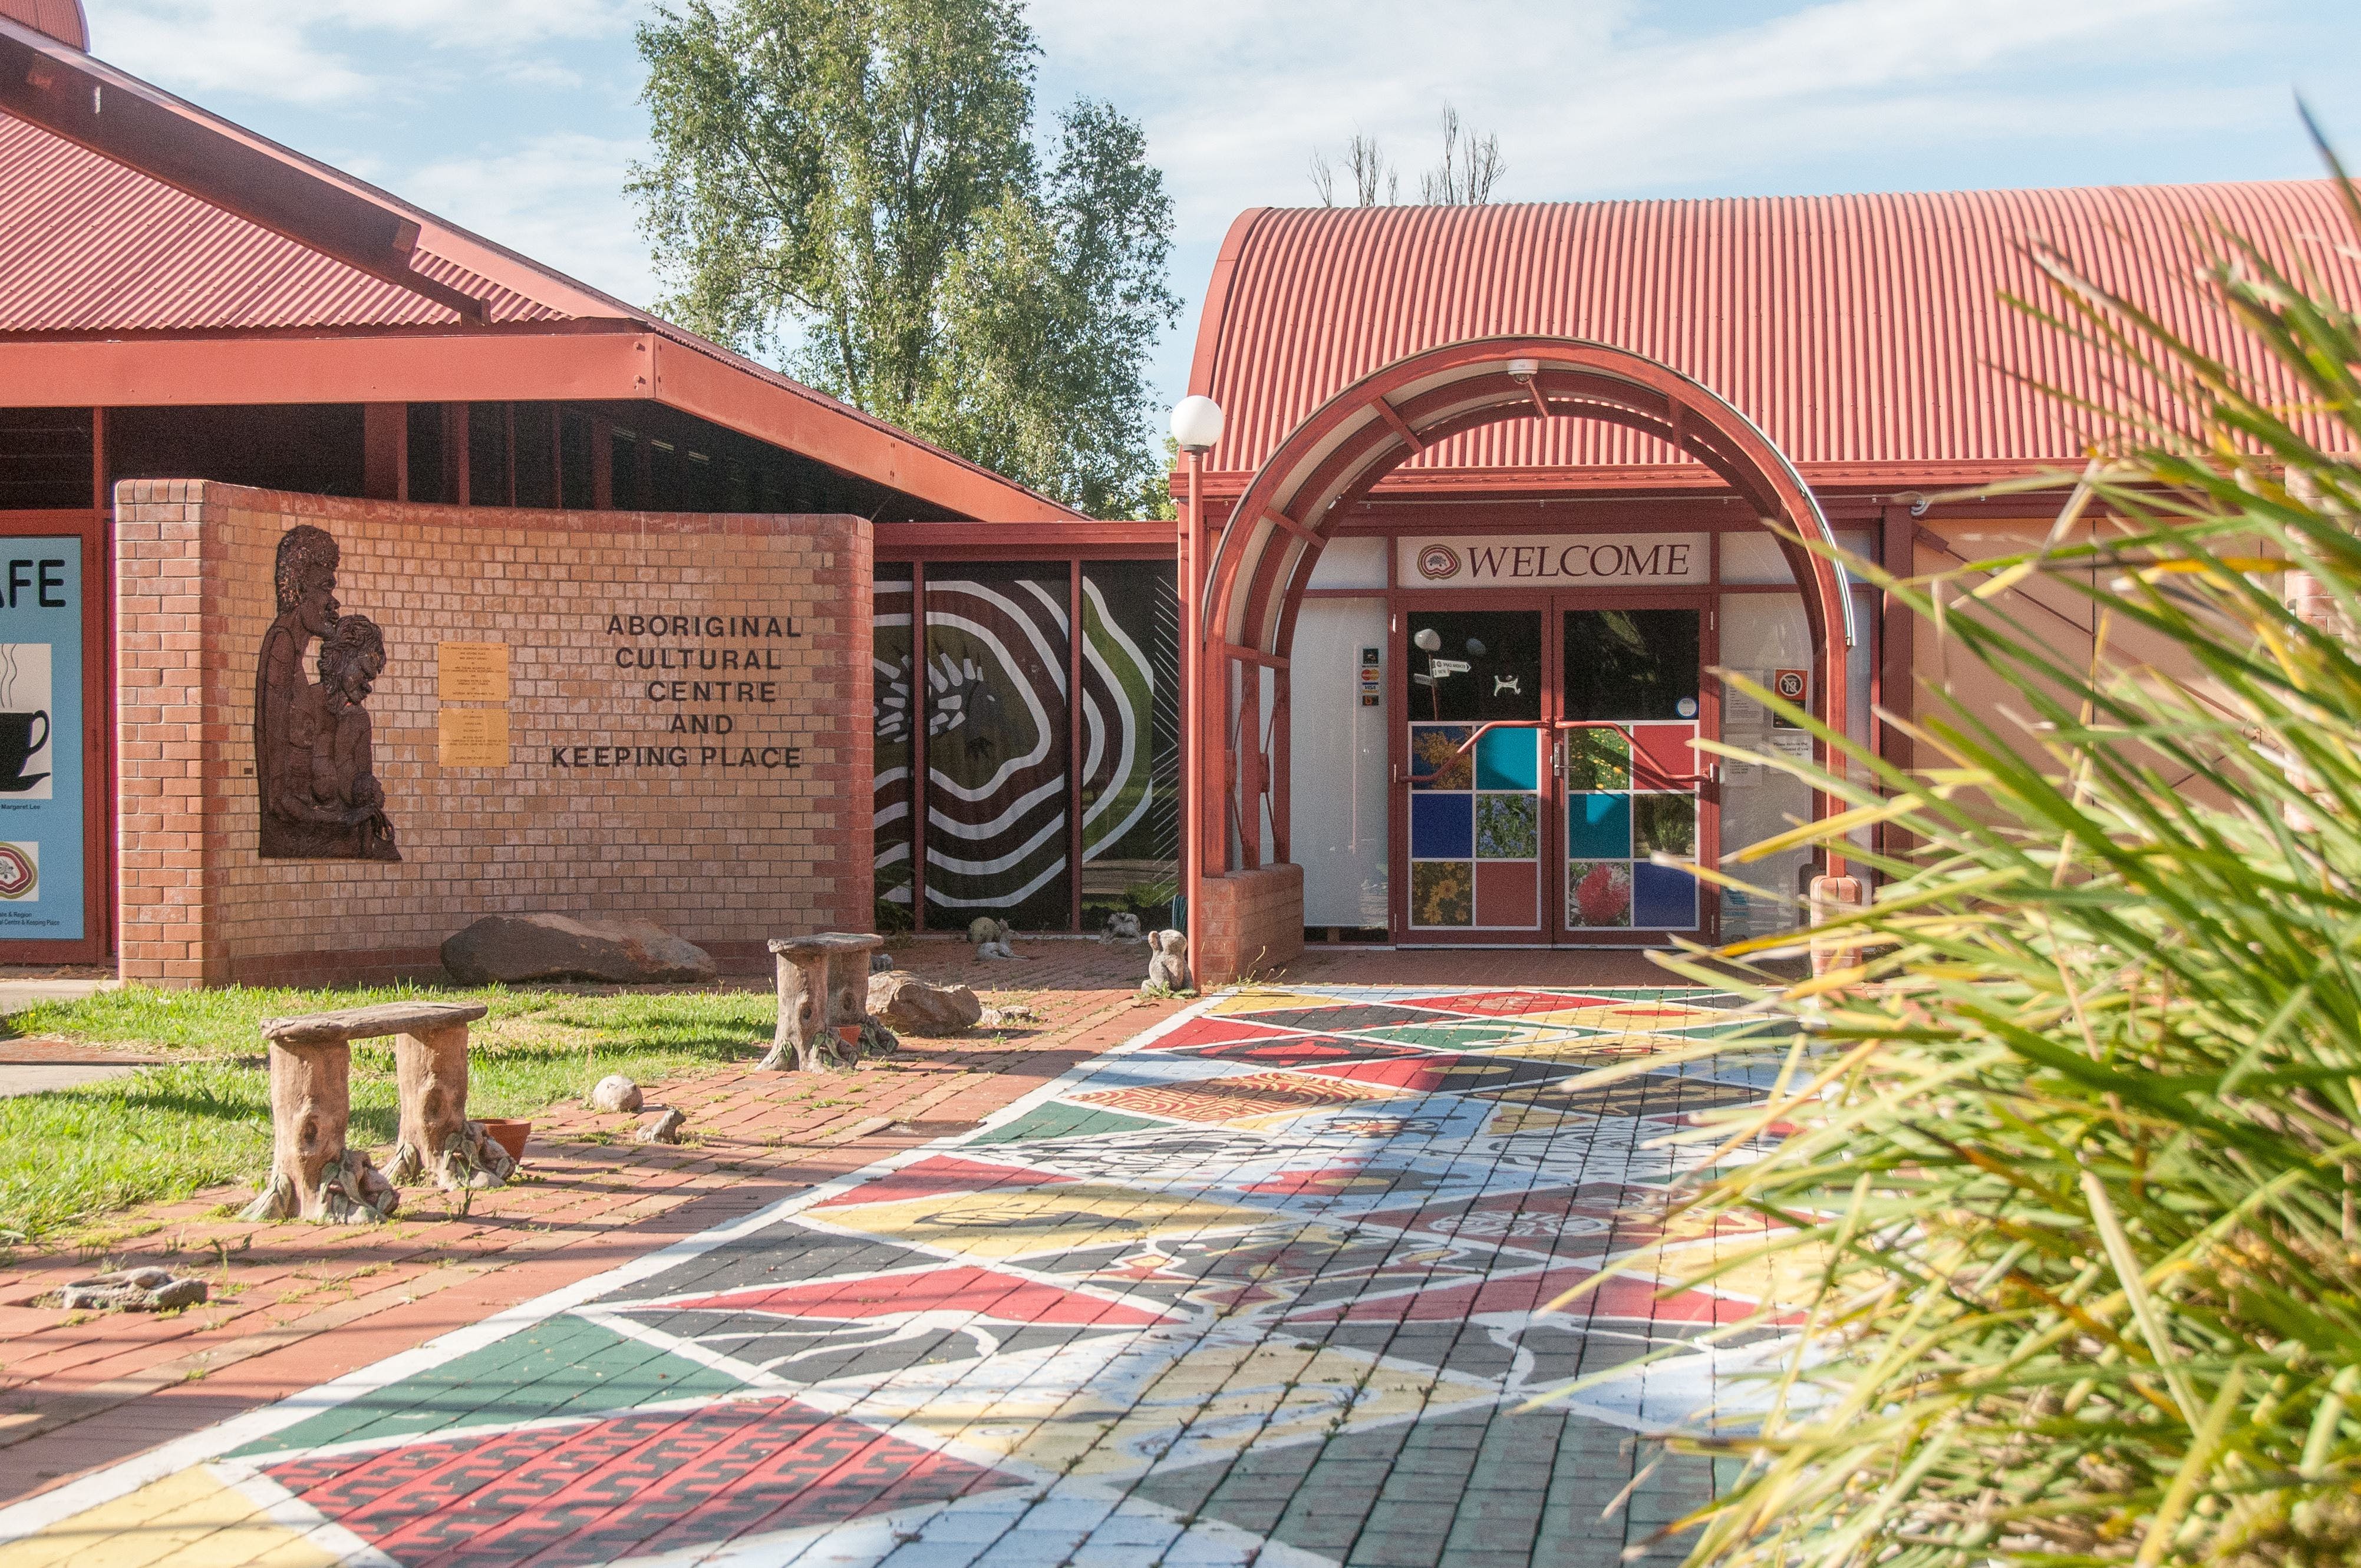 Armidale and Region Aboriginal Cultural Centre and Keeping Place - Accommodation in Bendigo